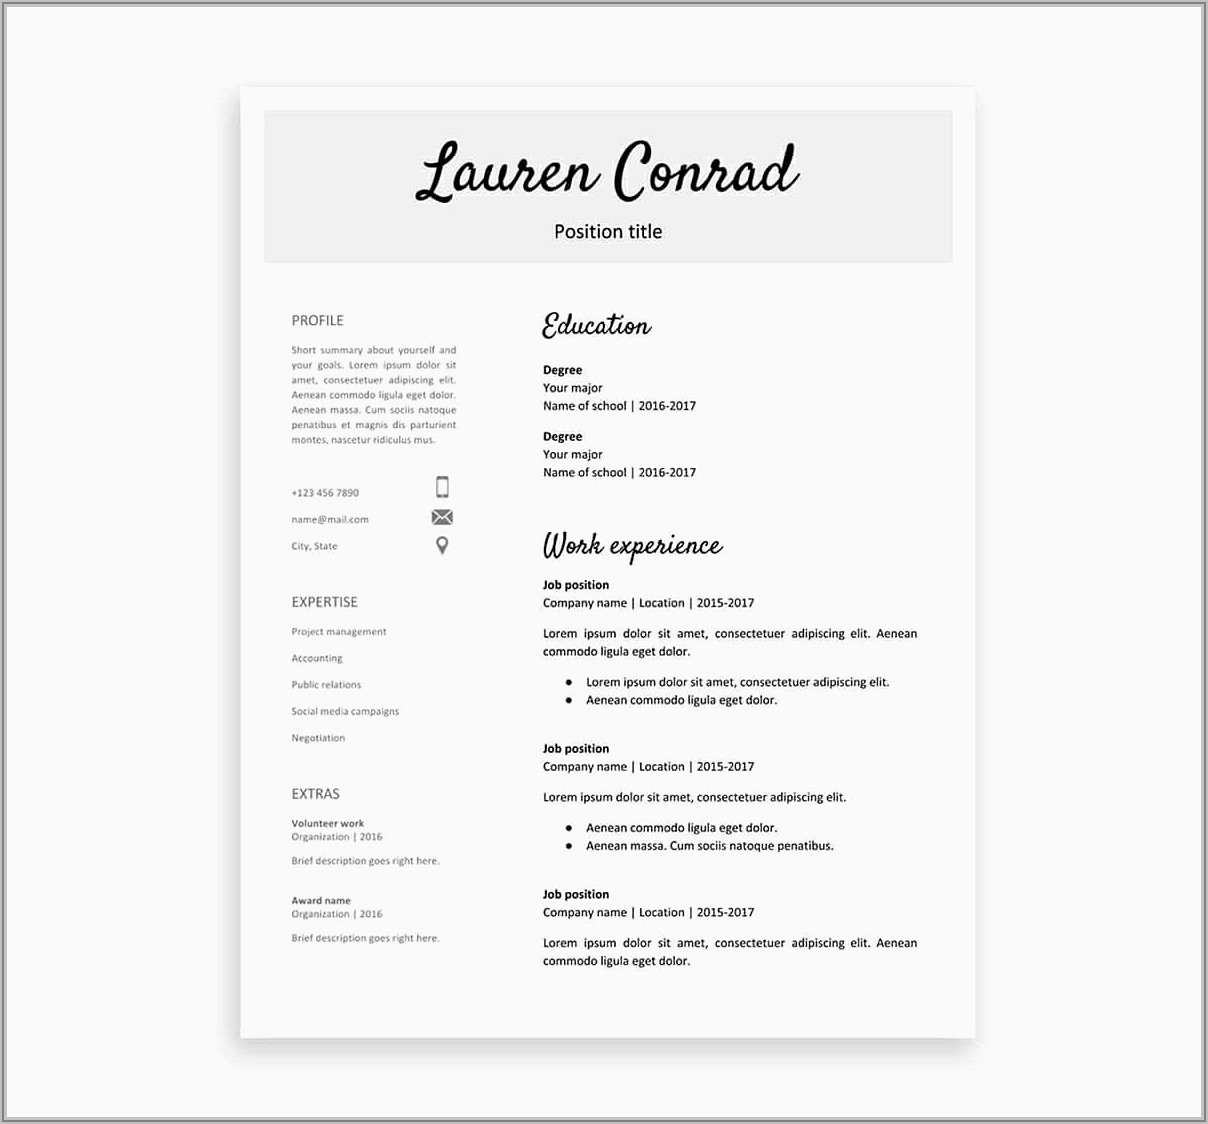 Resume Format Doc For Fresher Accountant